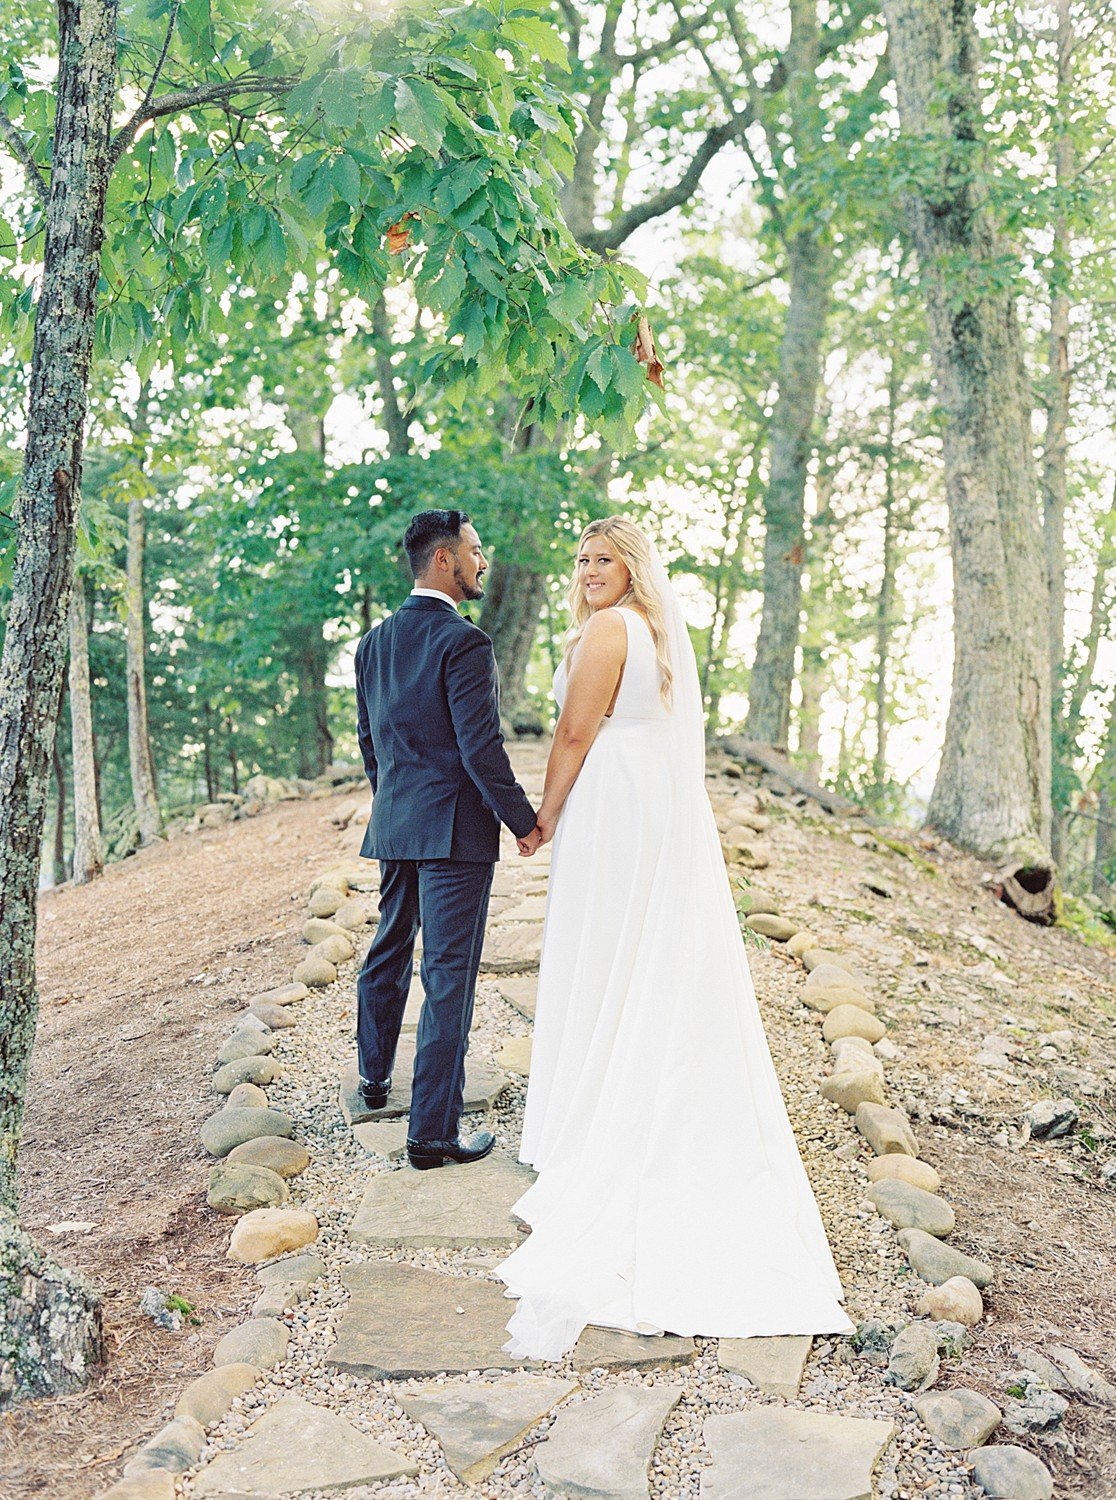 Light &amp; Airy in the Mountains - The Magnolia Venue - Sarah &amp; Harry